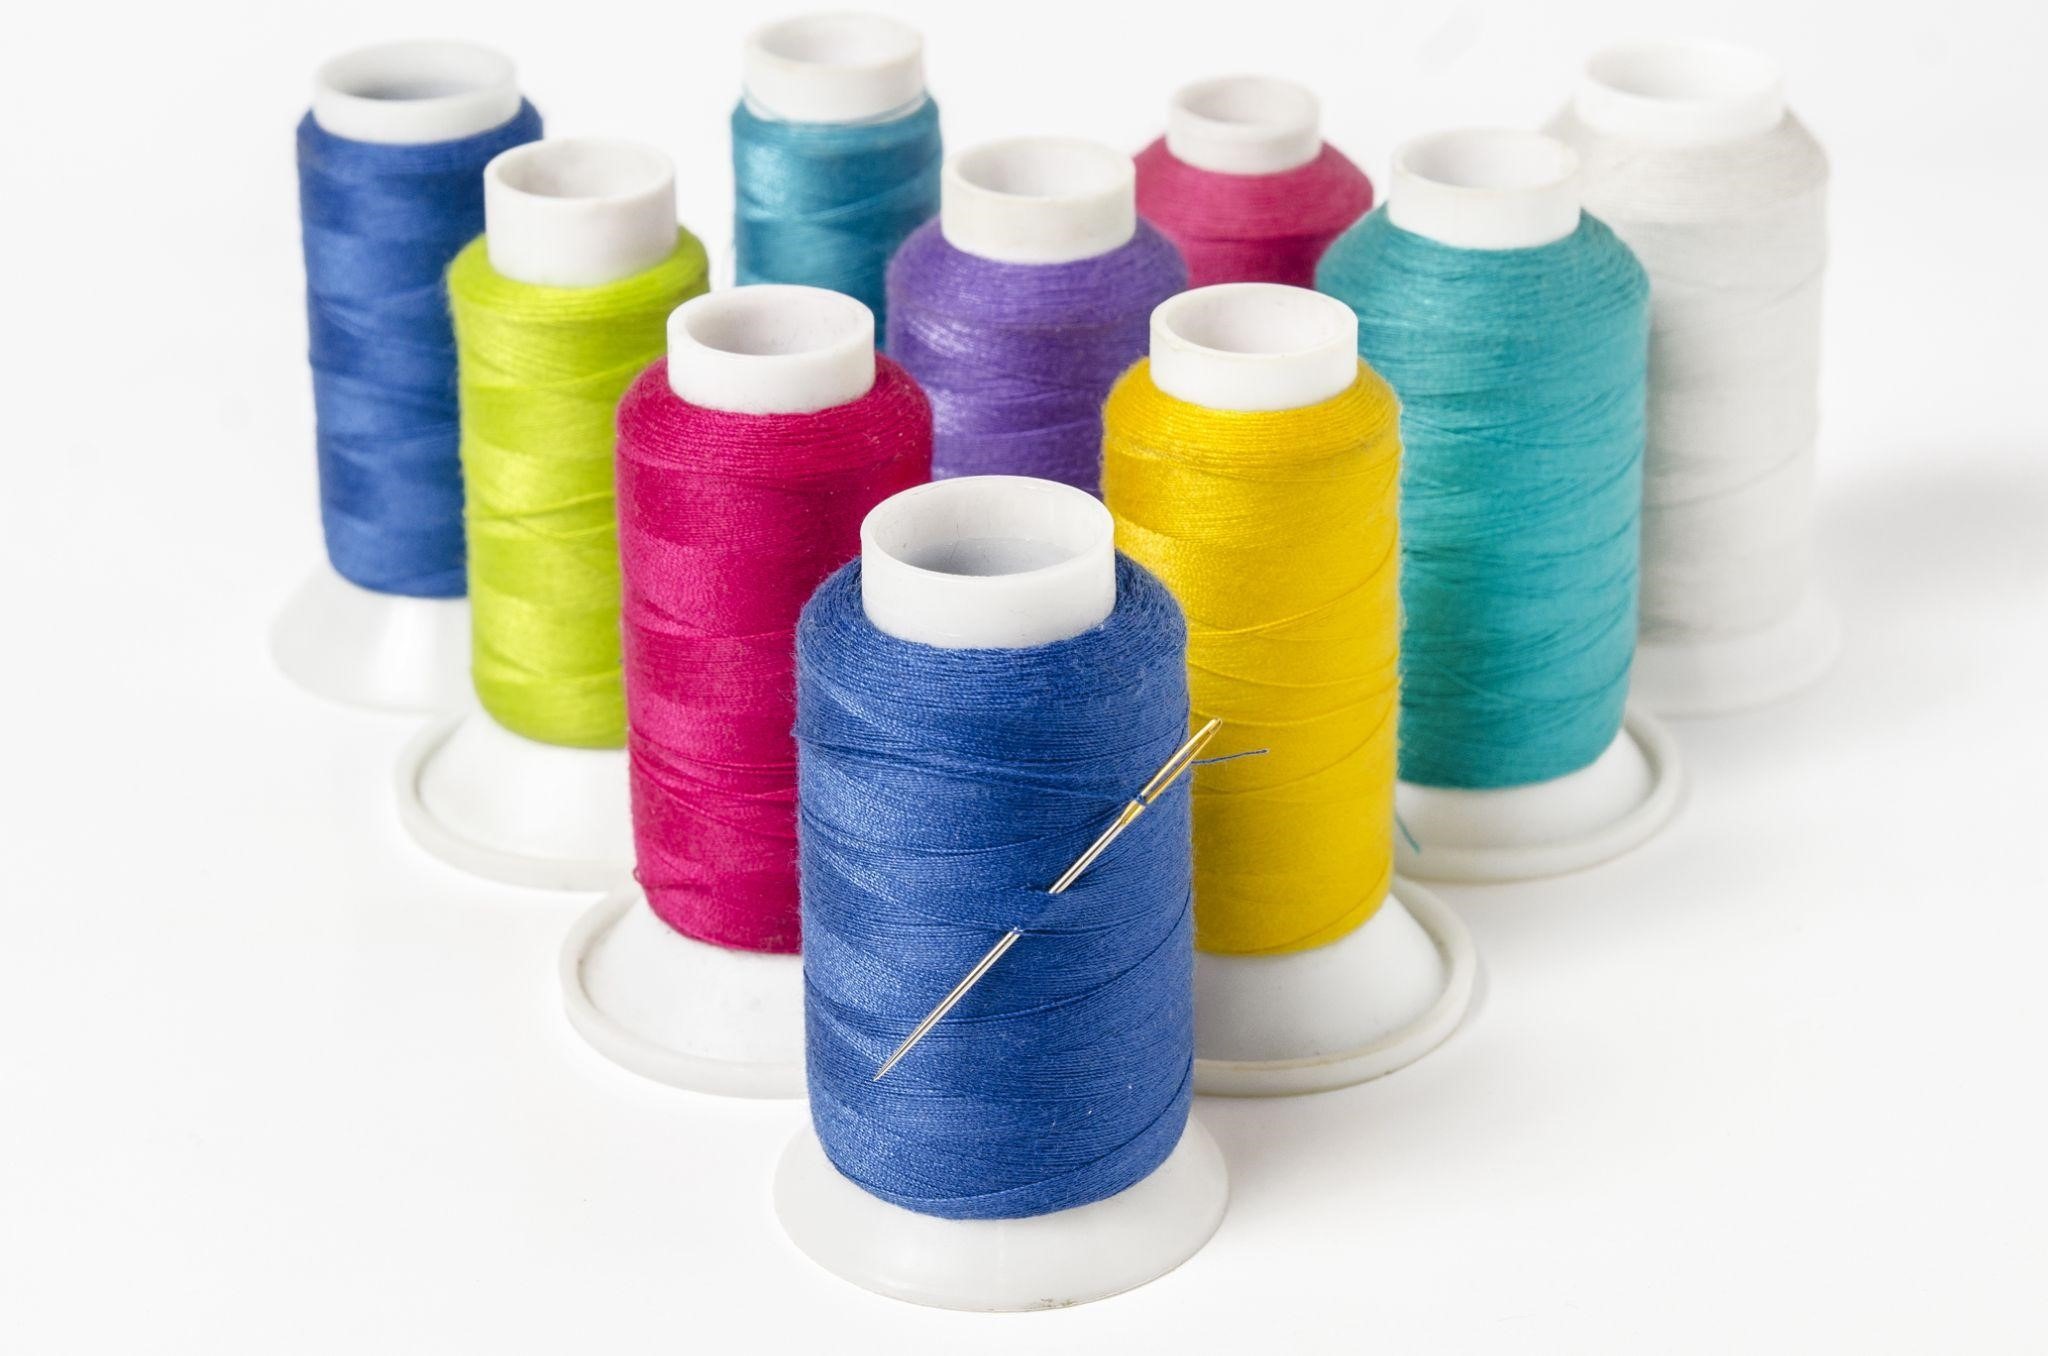 Sewing Threads and Their Technical Applications